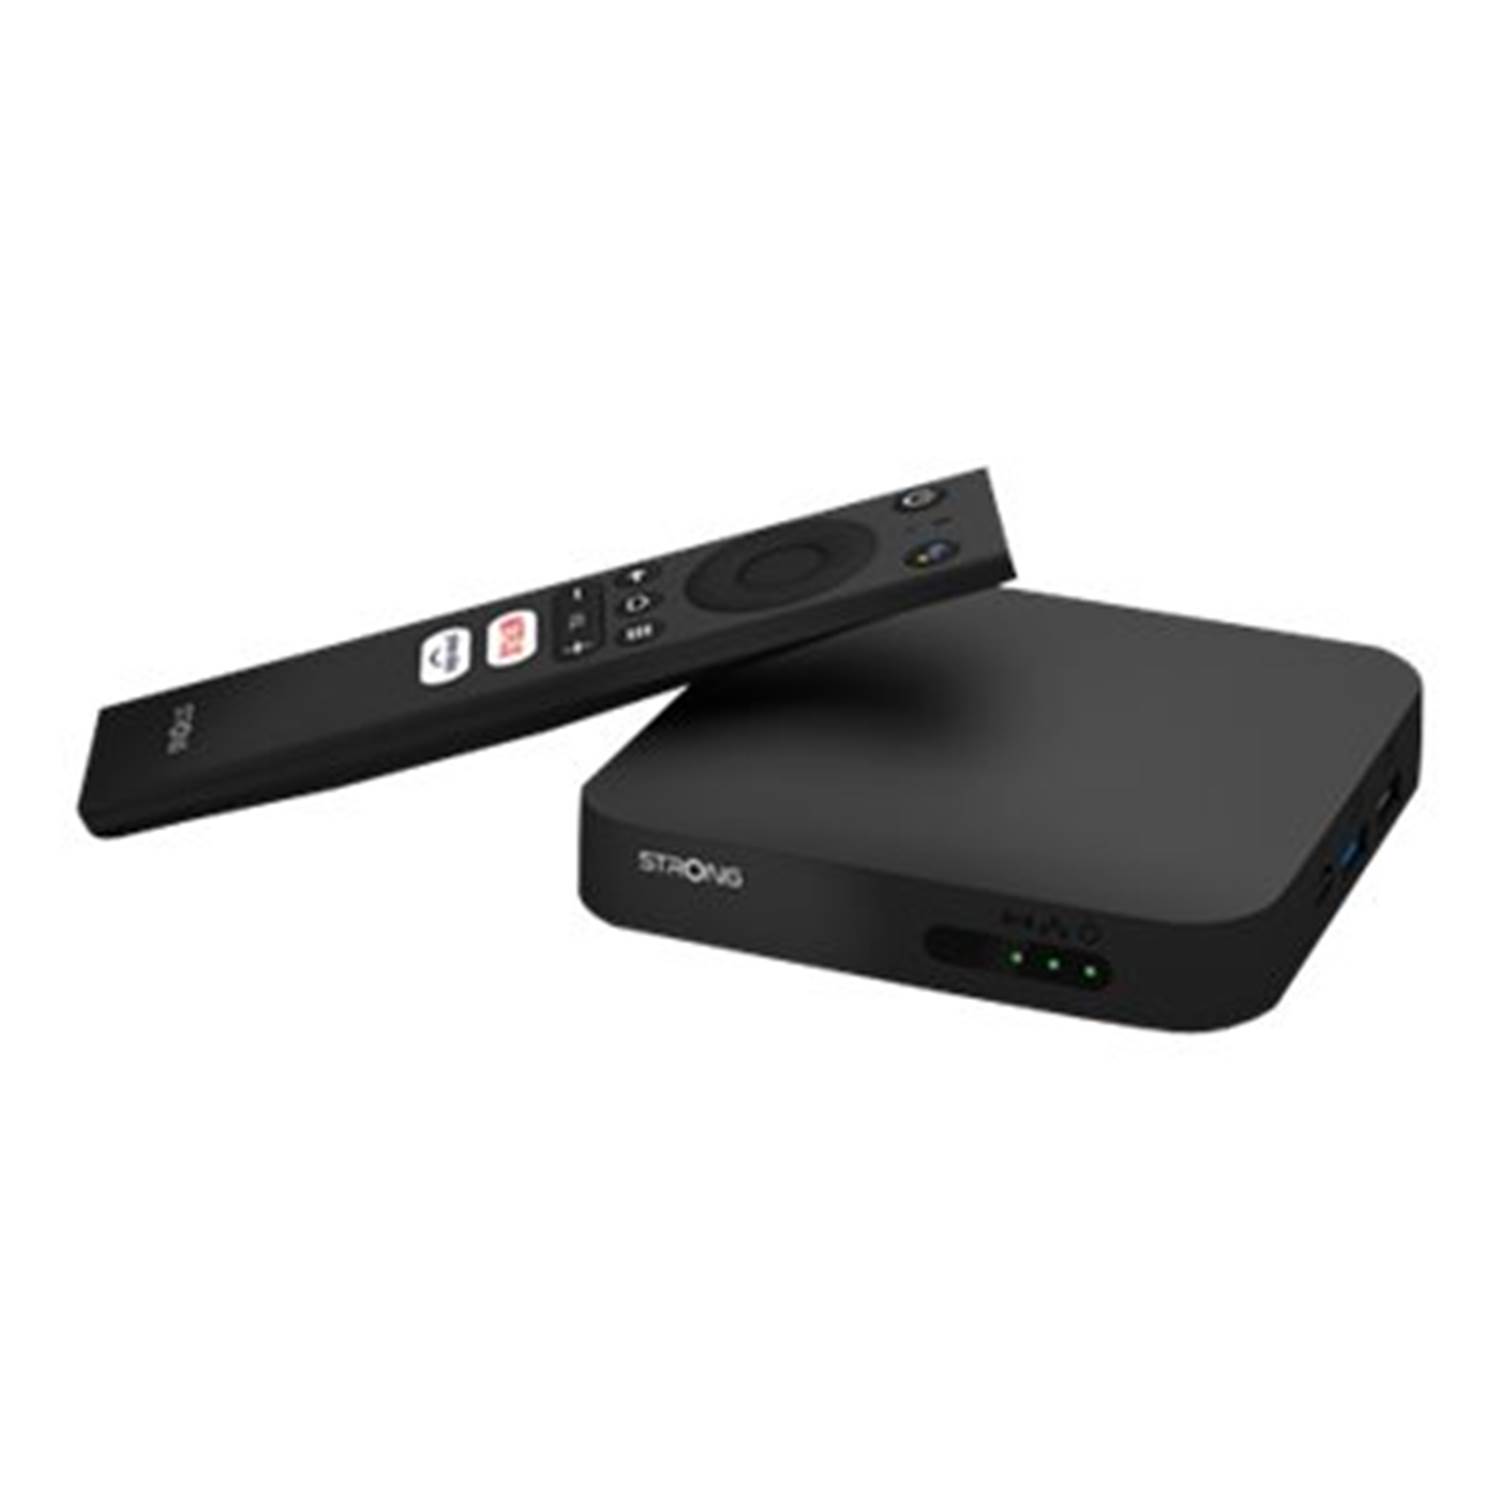 Strong Android Box LEAP-S1